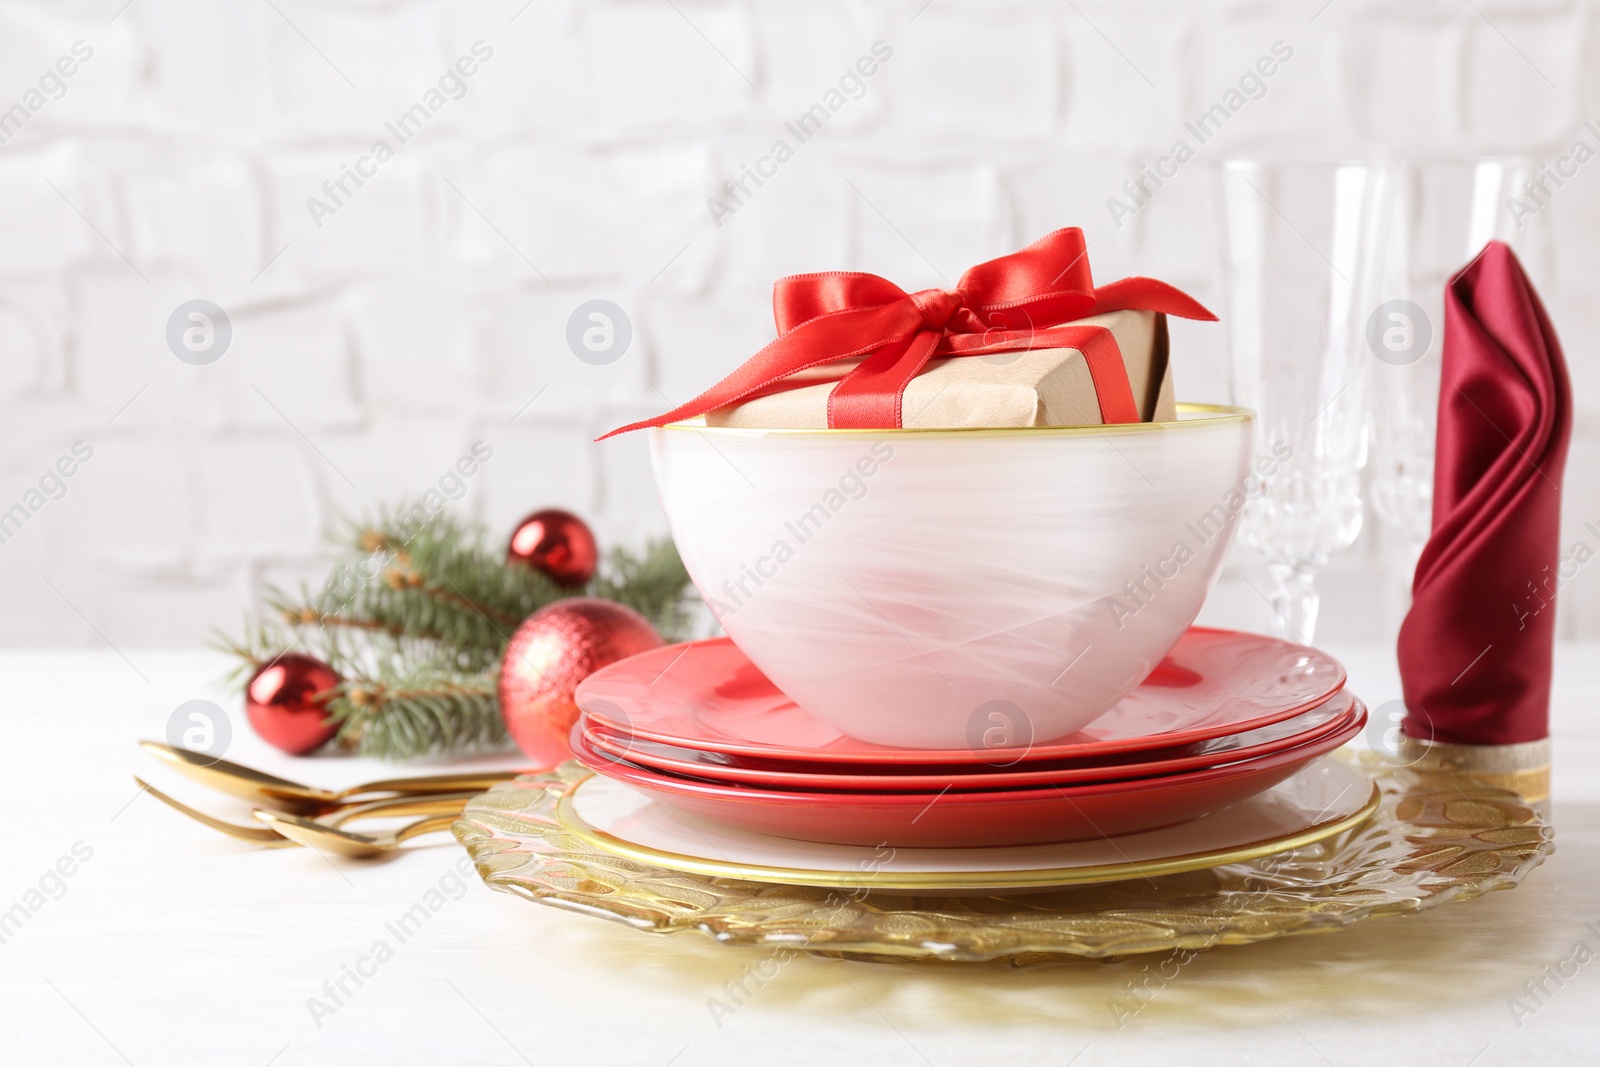 Photo of Festive dishware with gift and Christmas decorations on white table